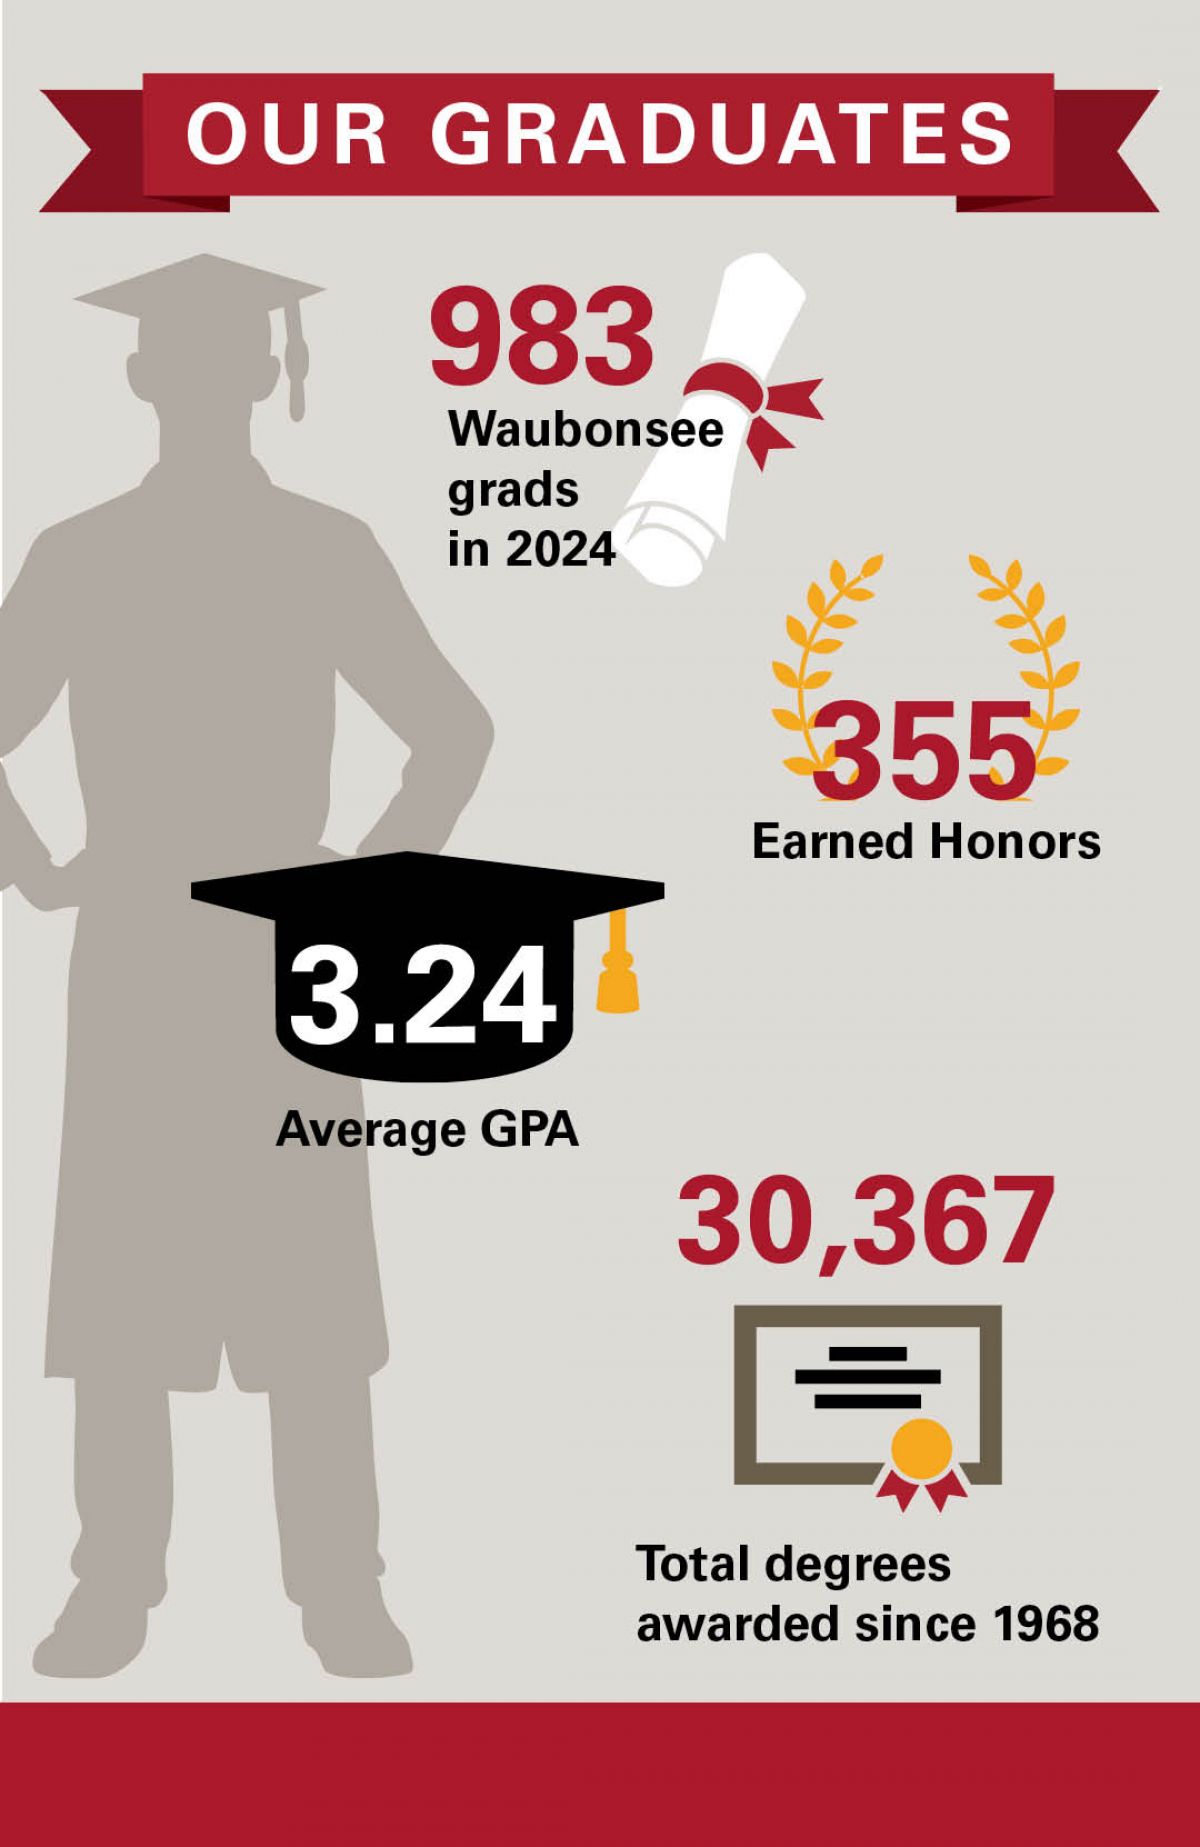 2024 Graduation Infographic: 983 Waubonsee grads; 355 Earned Honors; 3.24 Average GPA; 30,367 Total degrees awarded since 1968